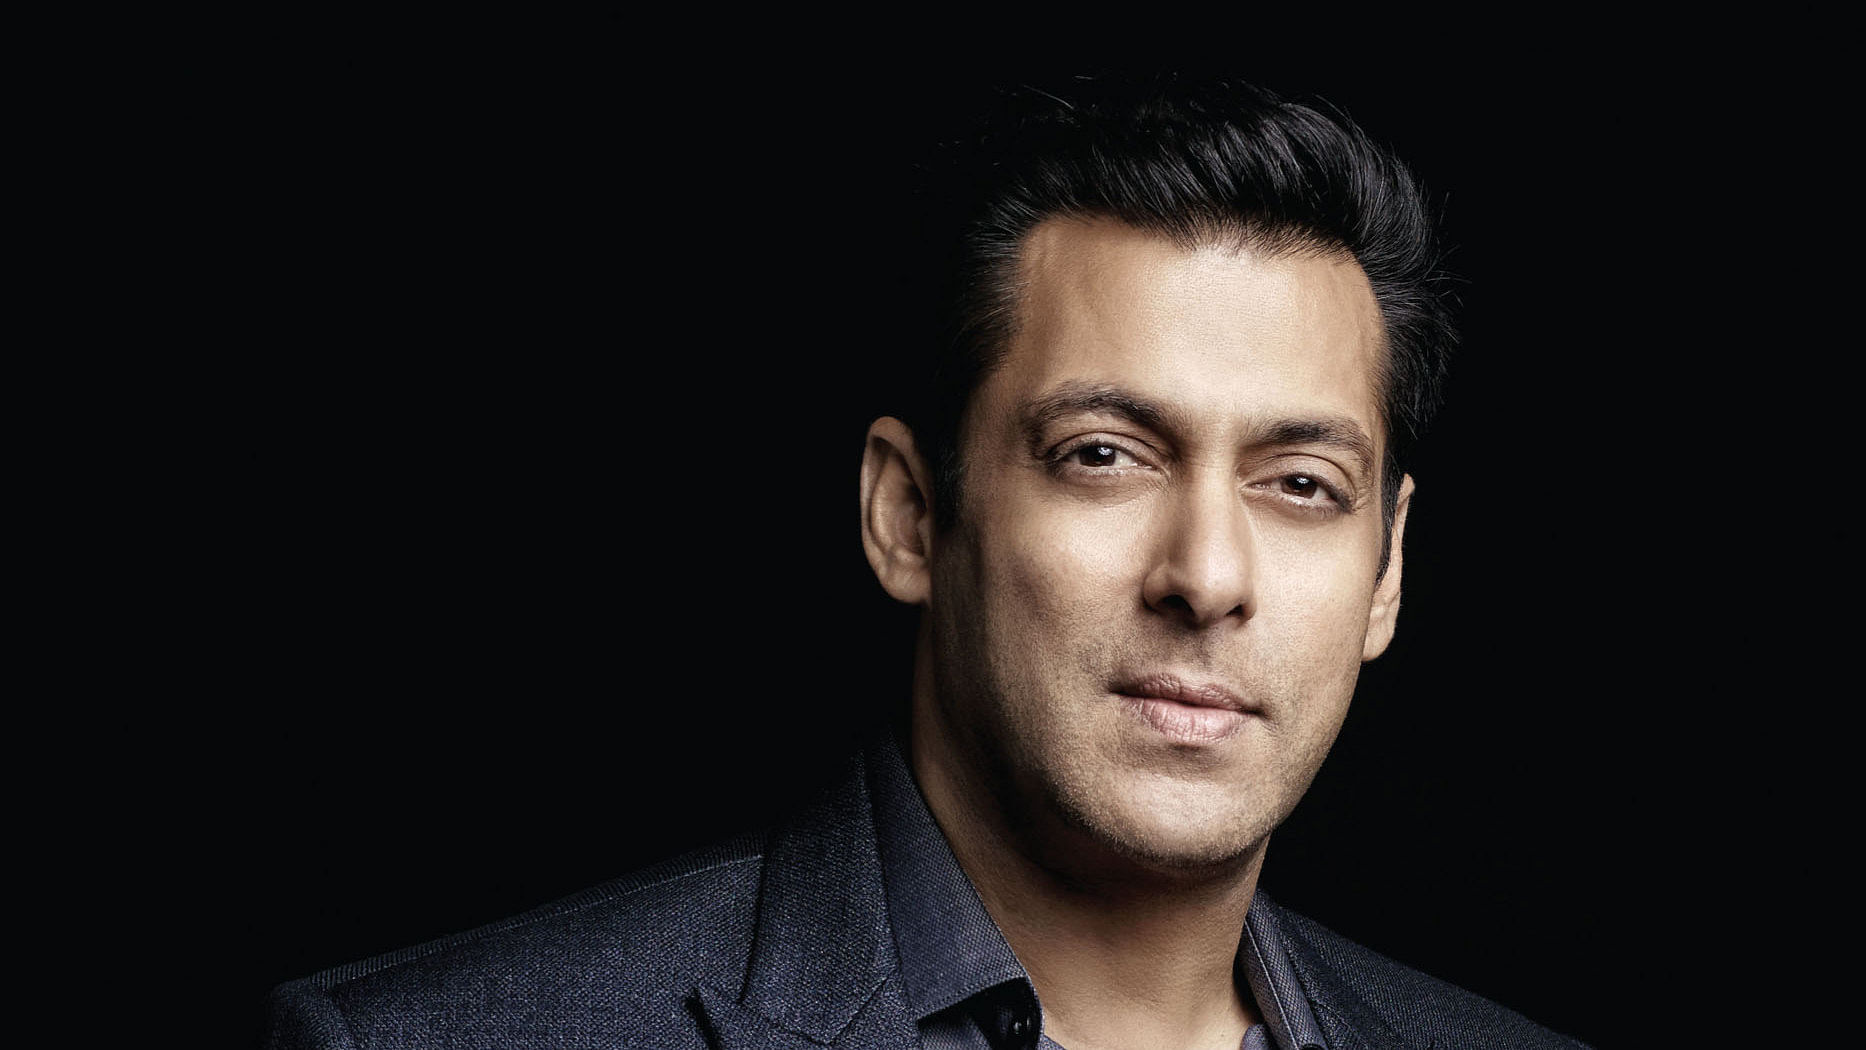 Actor Salman Khan’s biography, <i>Being Salman</i> hits the stands today (Photo Courtesy: Penguin Books India)